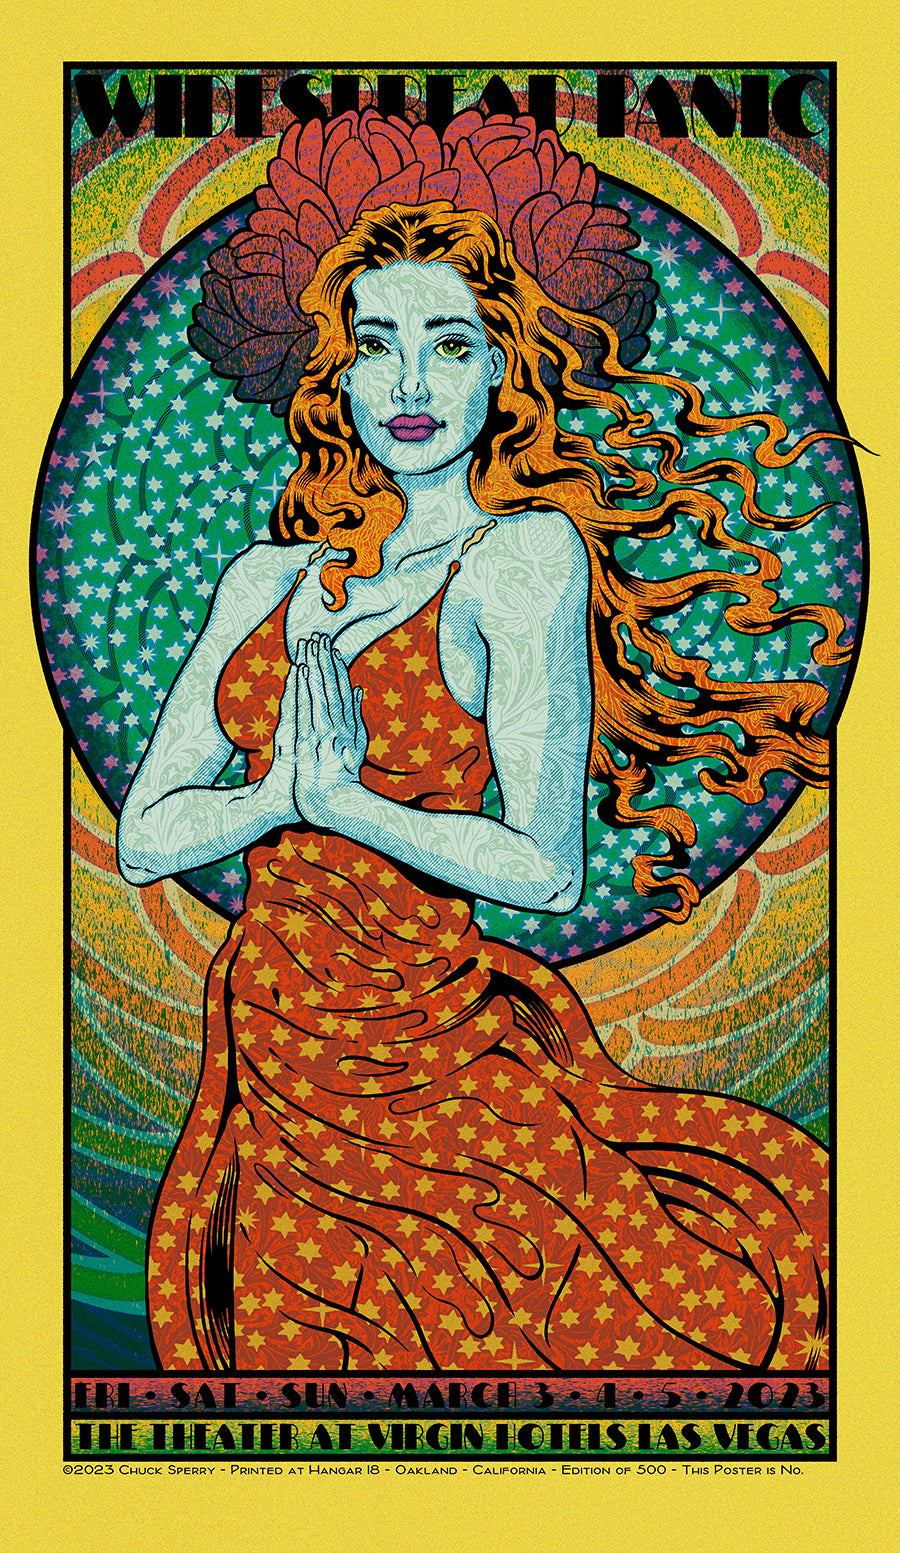  by Chuck Sperry titled Chuck Sperry - "Widespread Panic, Venus" Print